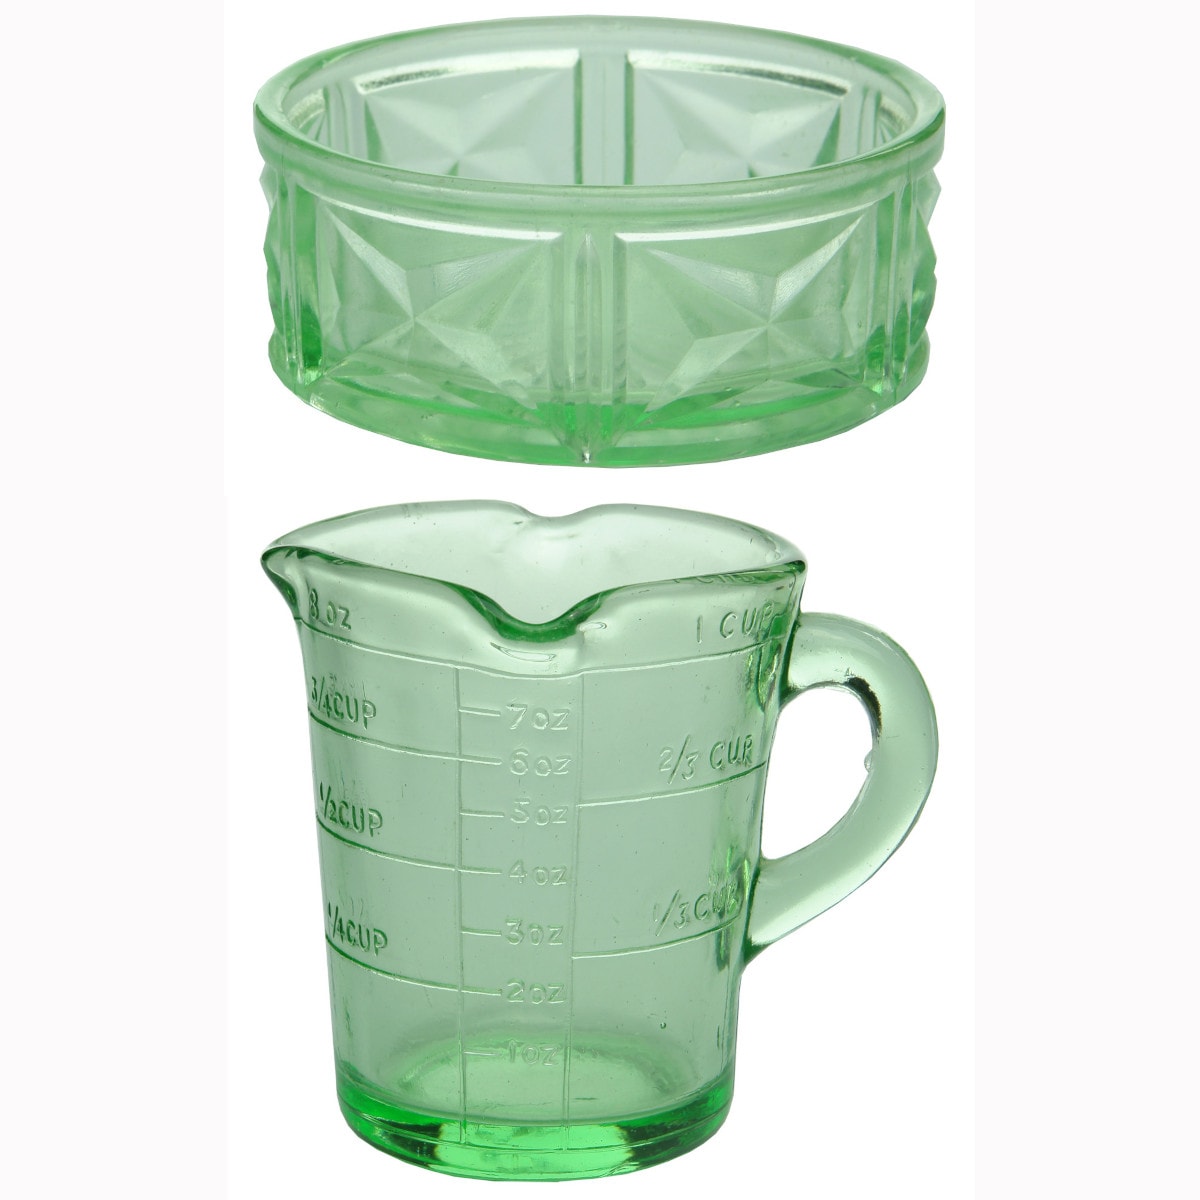 Pair of Green Depression Glass Items